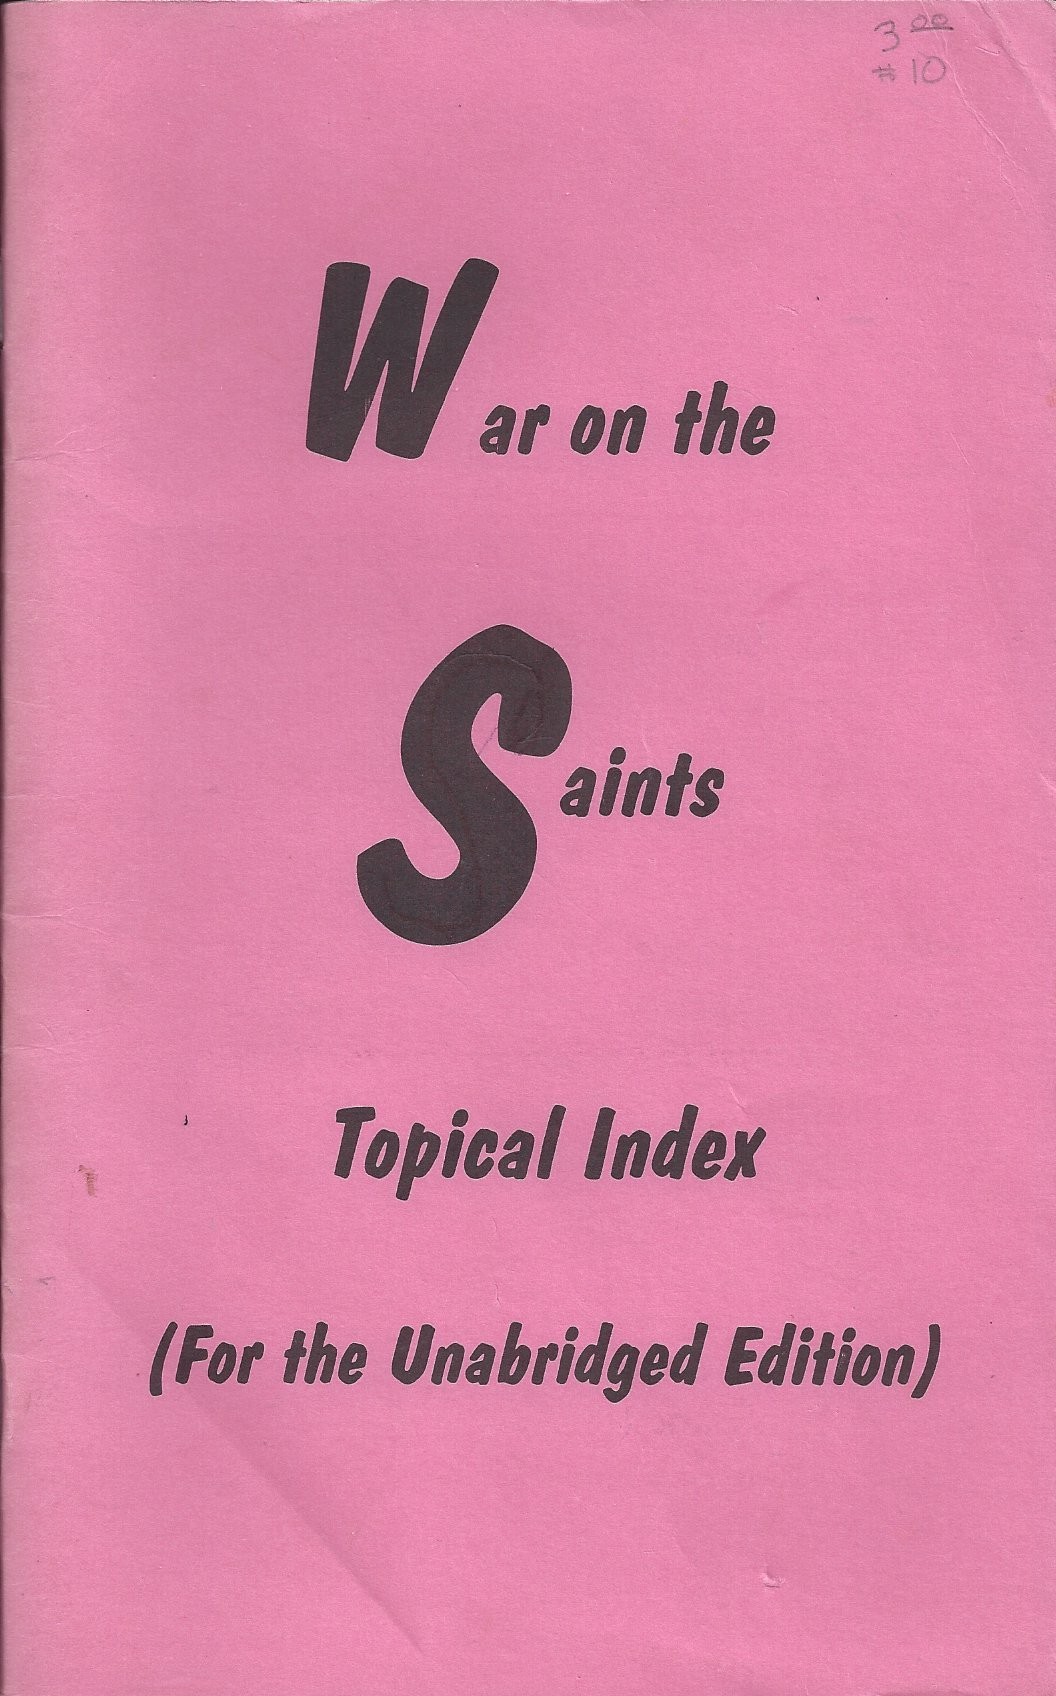 War on the Saints | Topical Index